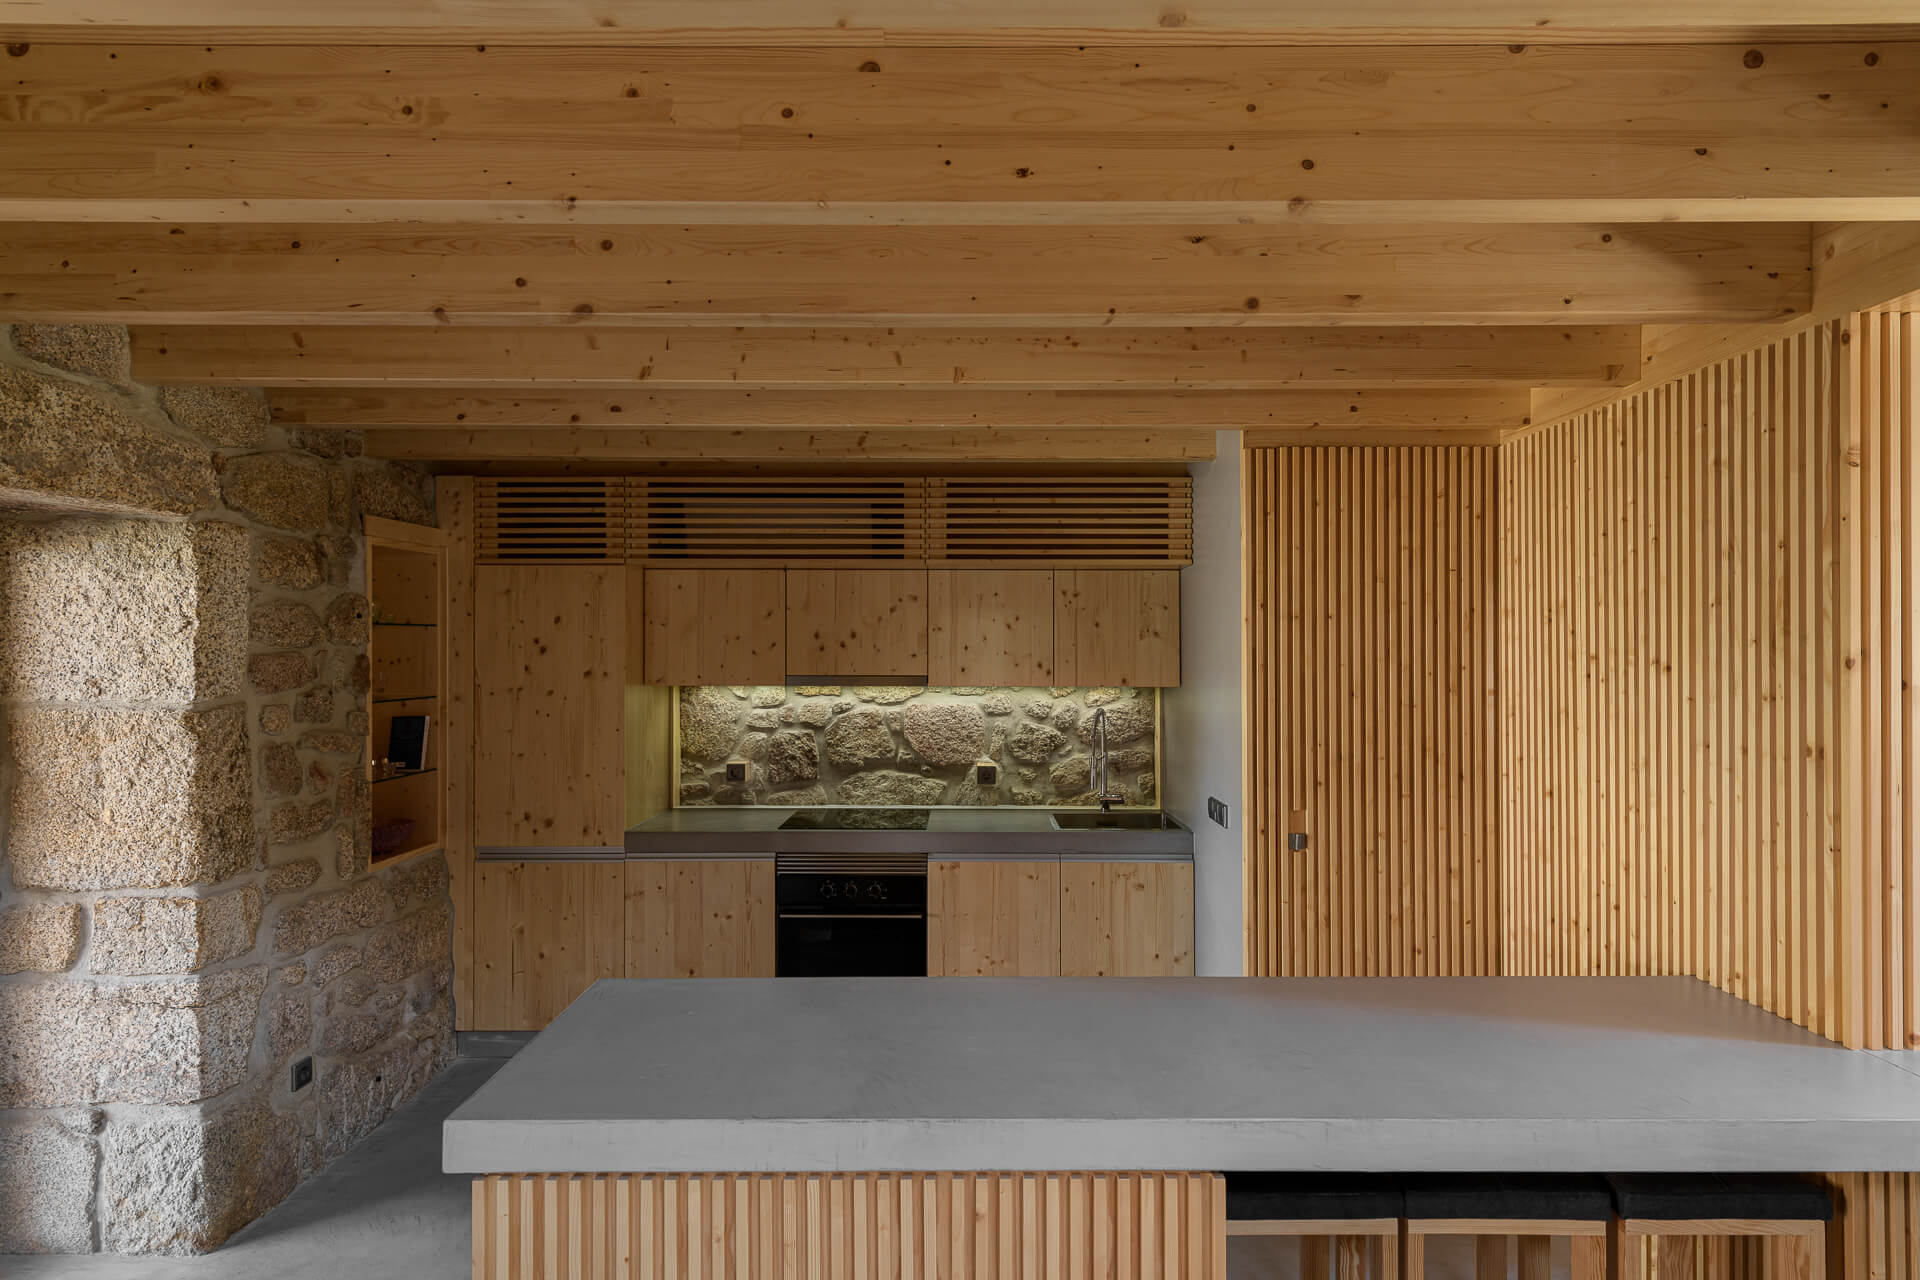 The kitchen area in the house is dominated by wood material